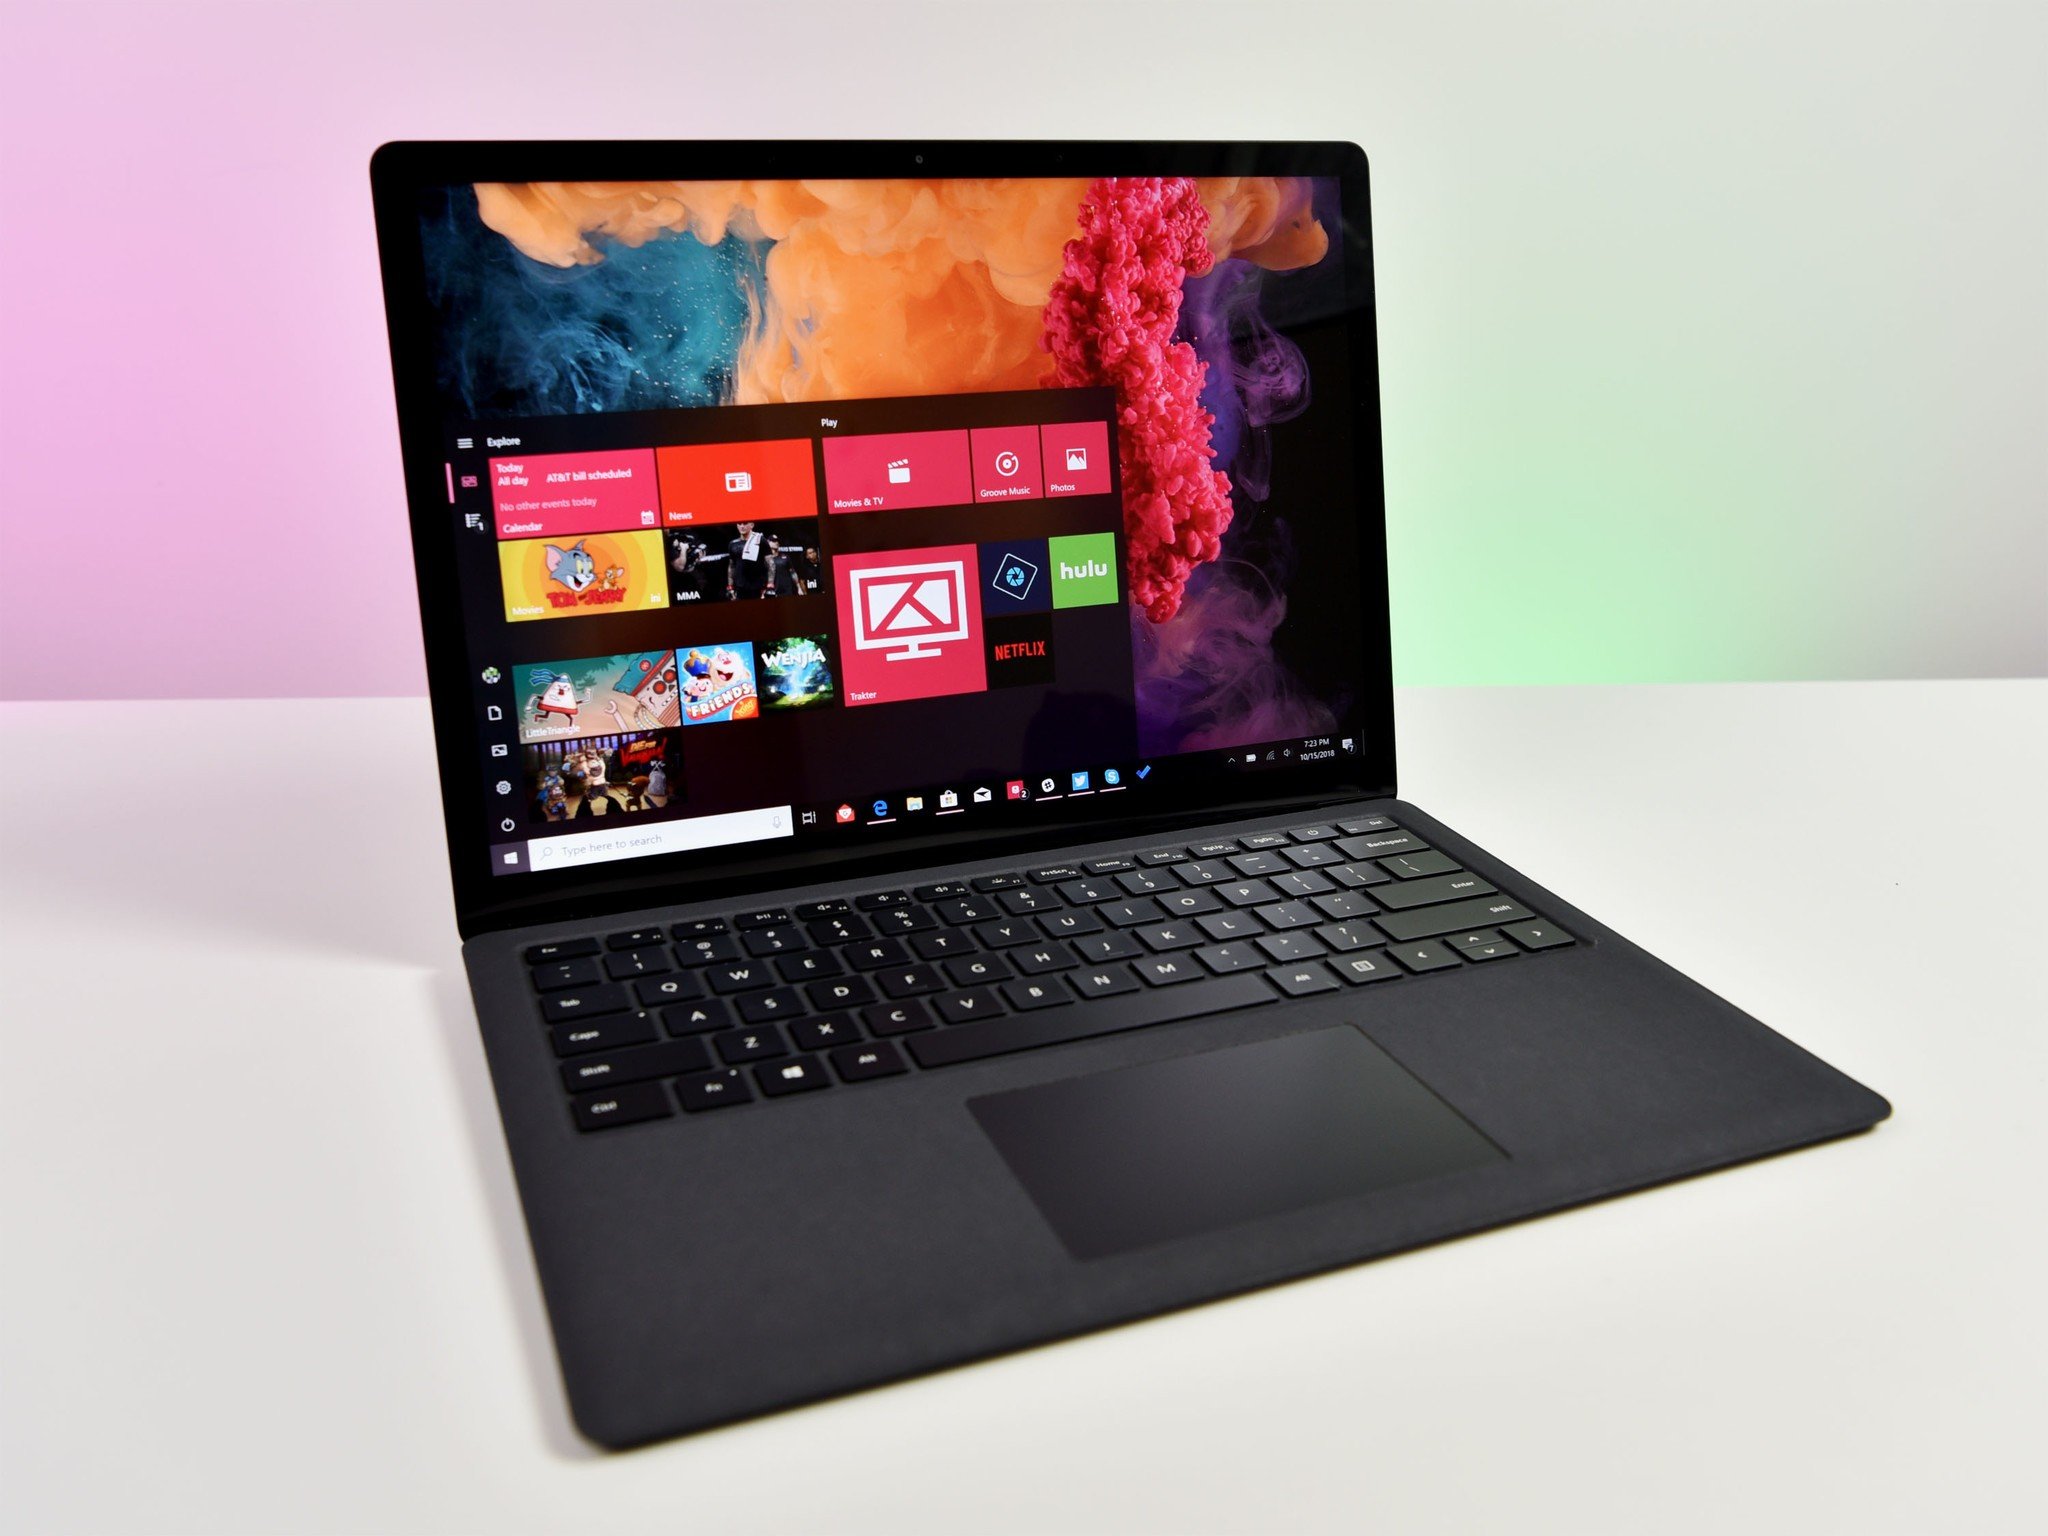 Microsoft Surface Laptop 2 review: The best laptop of 2018